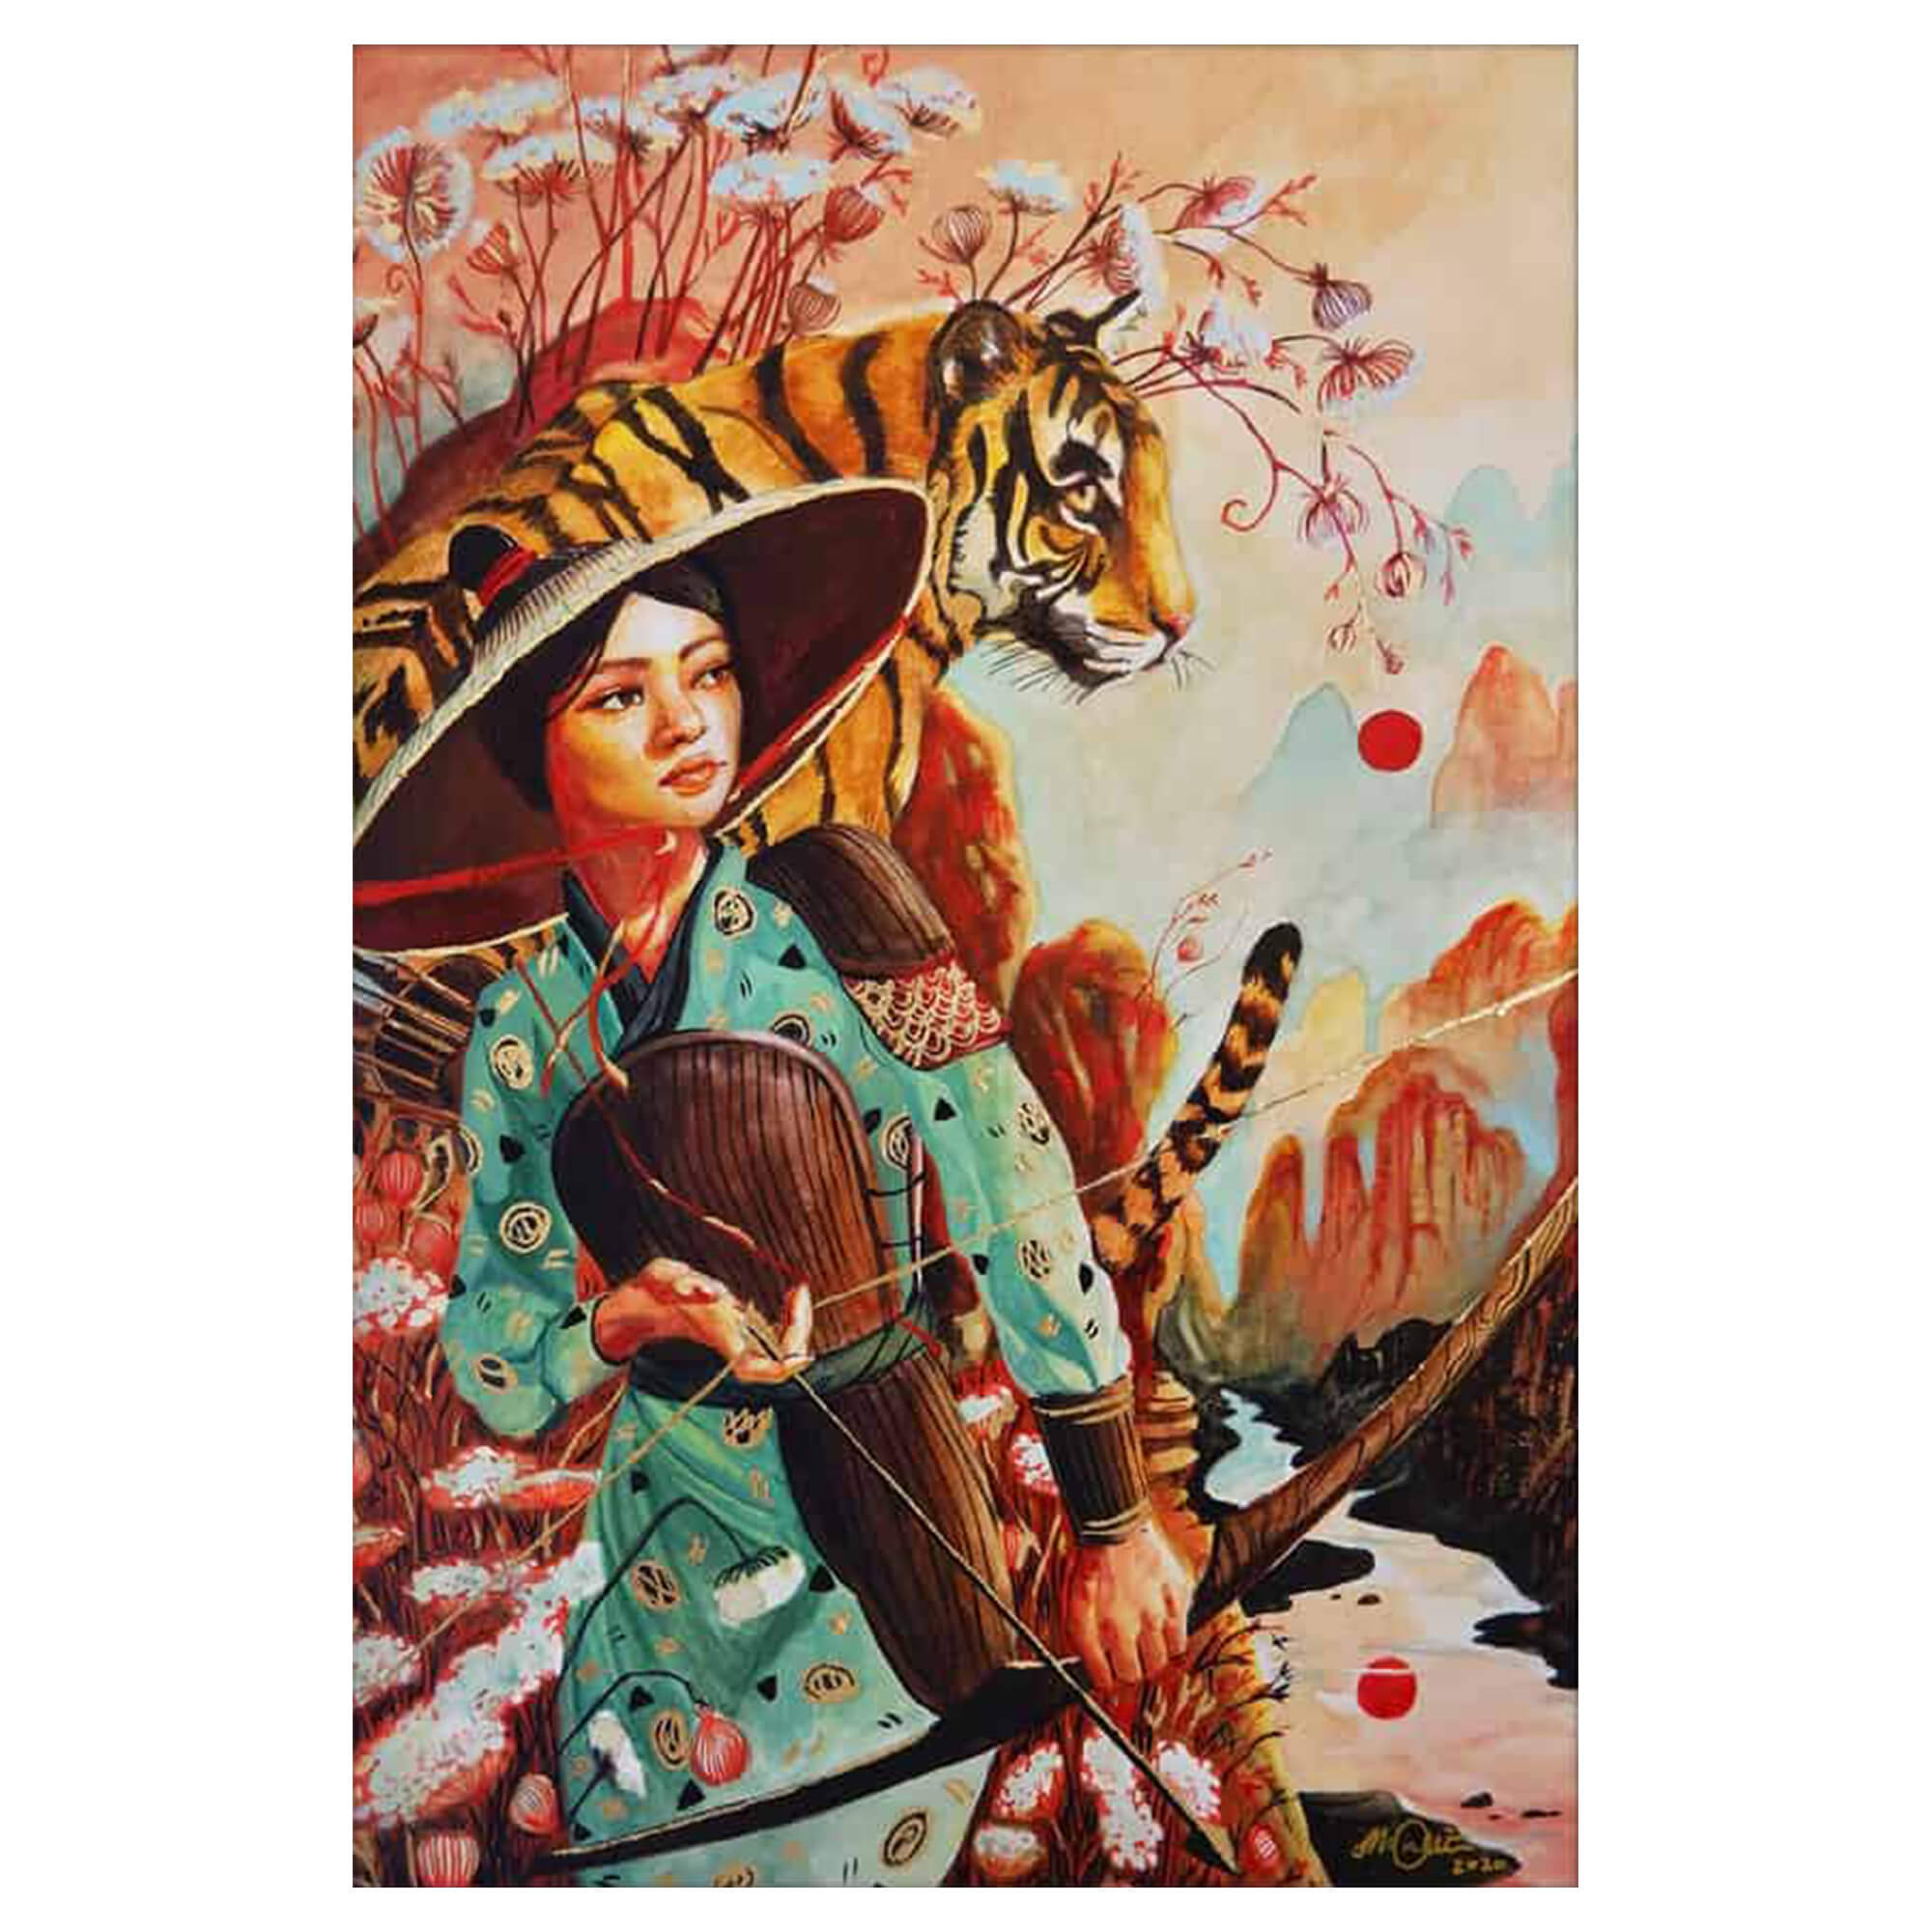 A matted art print of a woman warrior with her tiger by Hawaii artist Mae Waite